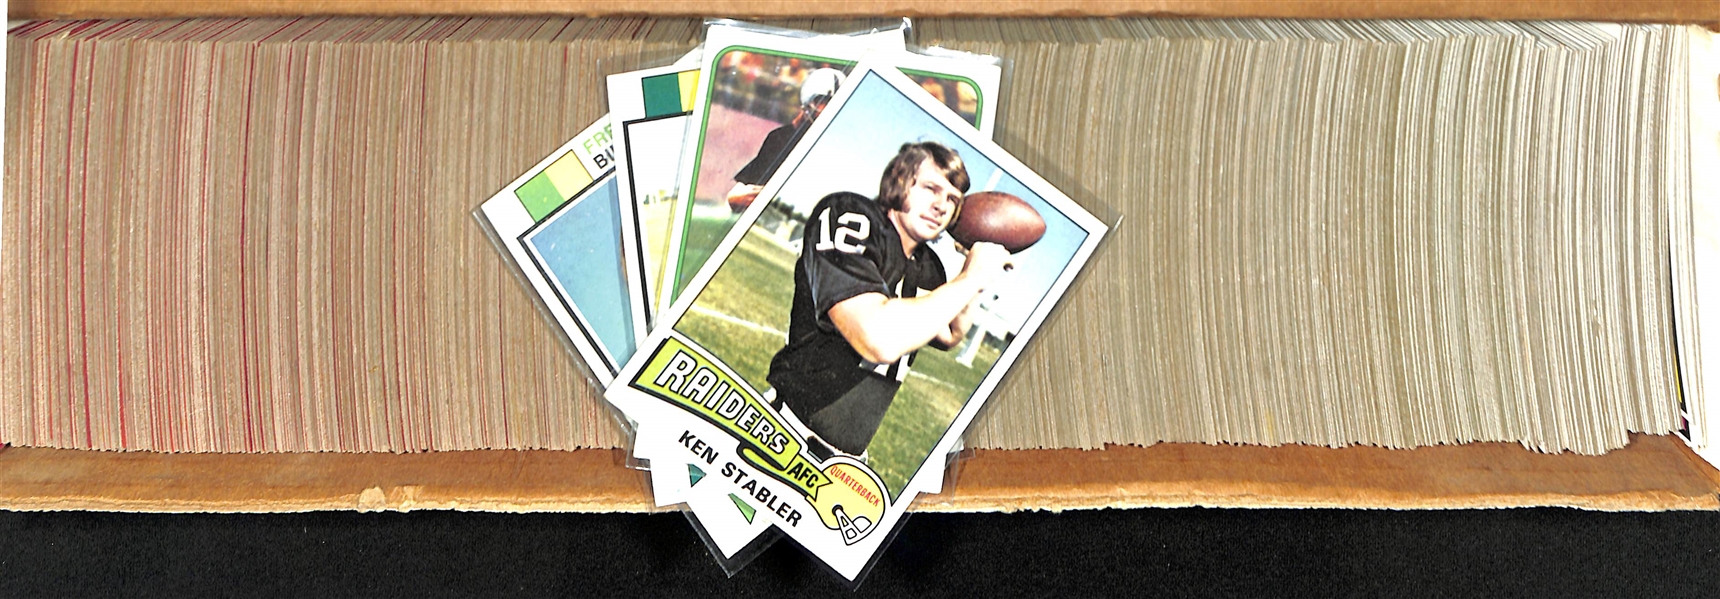 Lot of (750+) Topps Football Cards from 1973-1979 w. 1975 & 1976 Ken Stabler